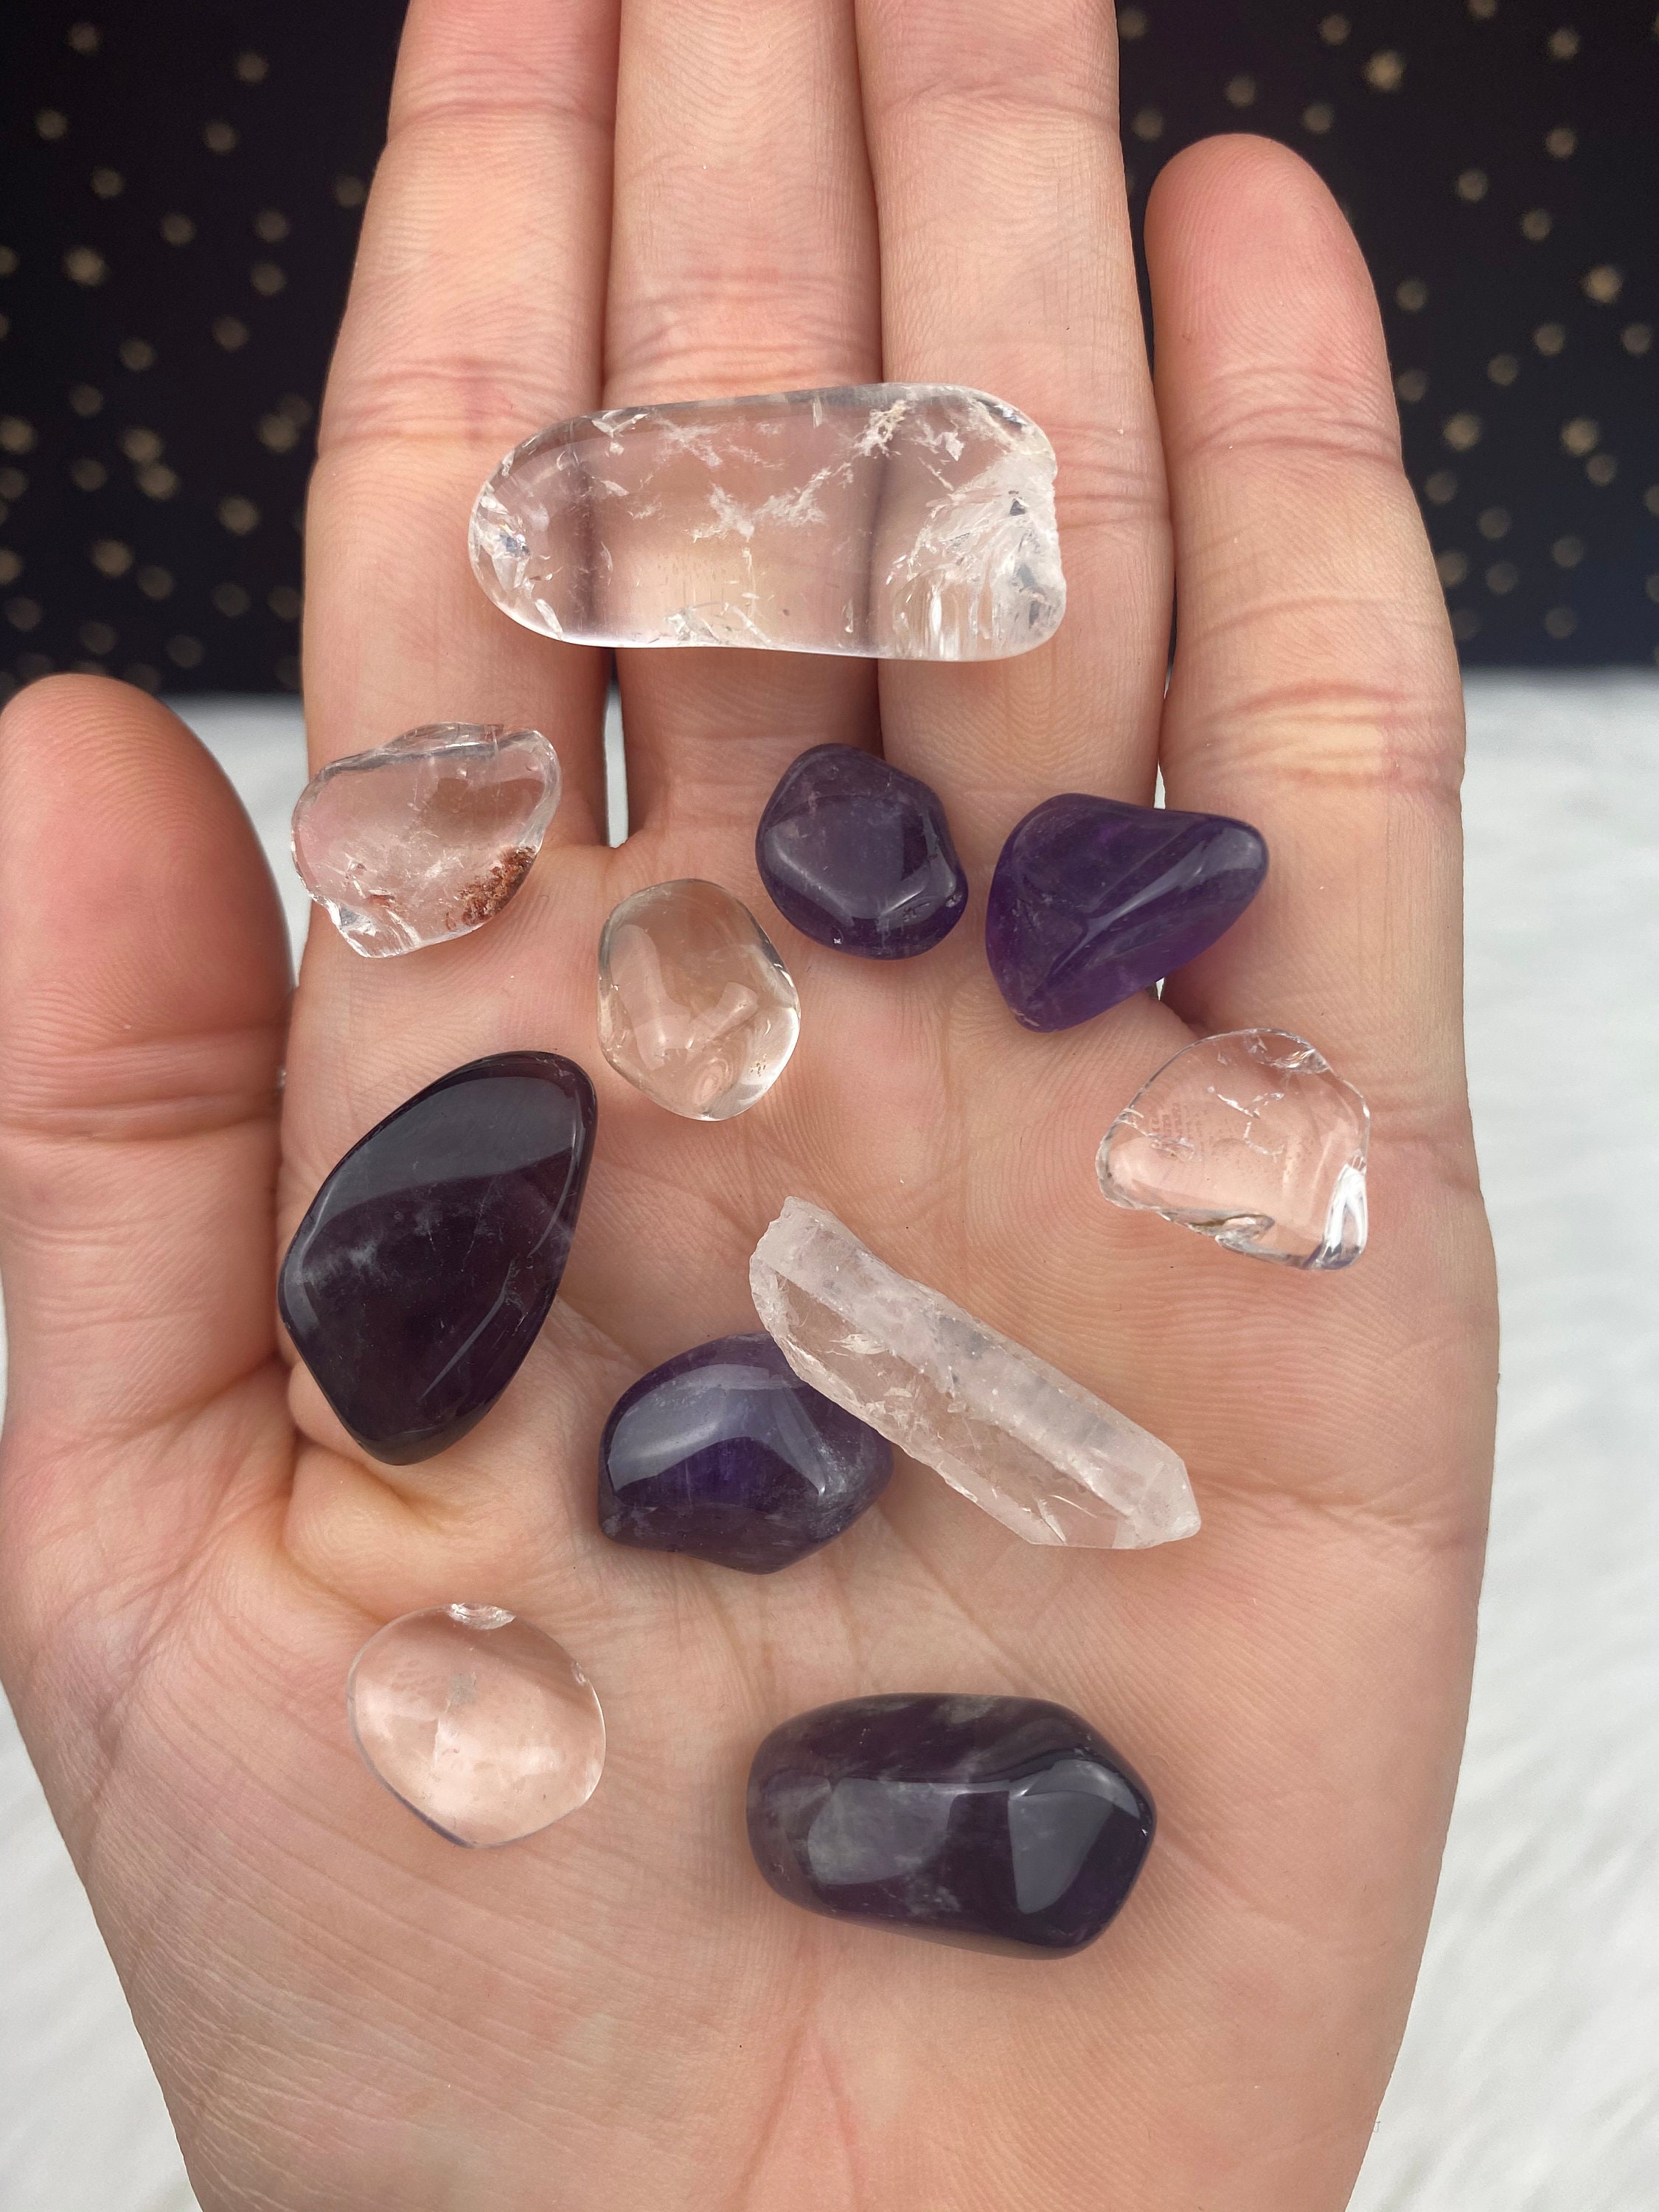 Crystals-Stones in your bra pouch “”